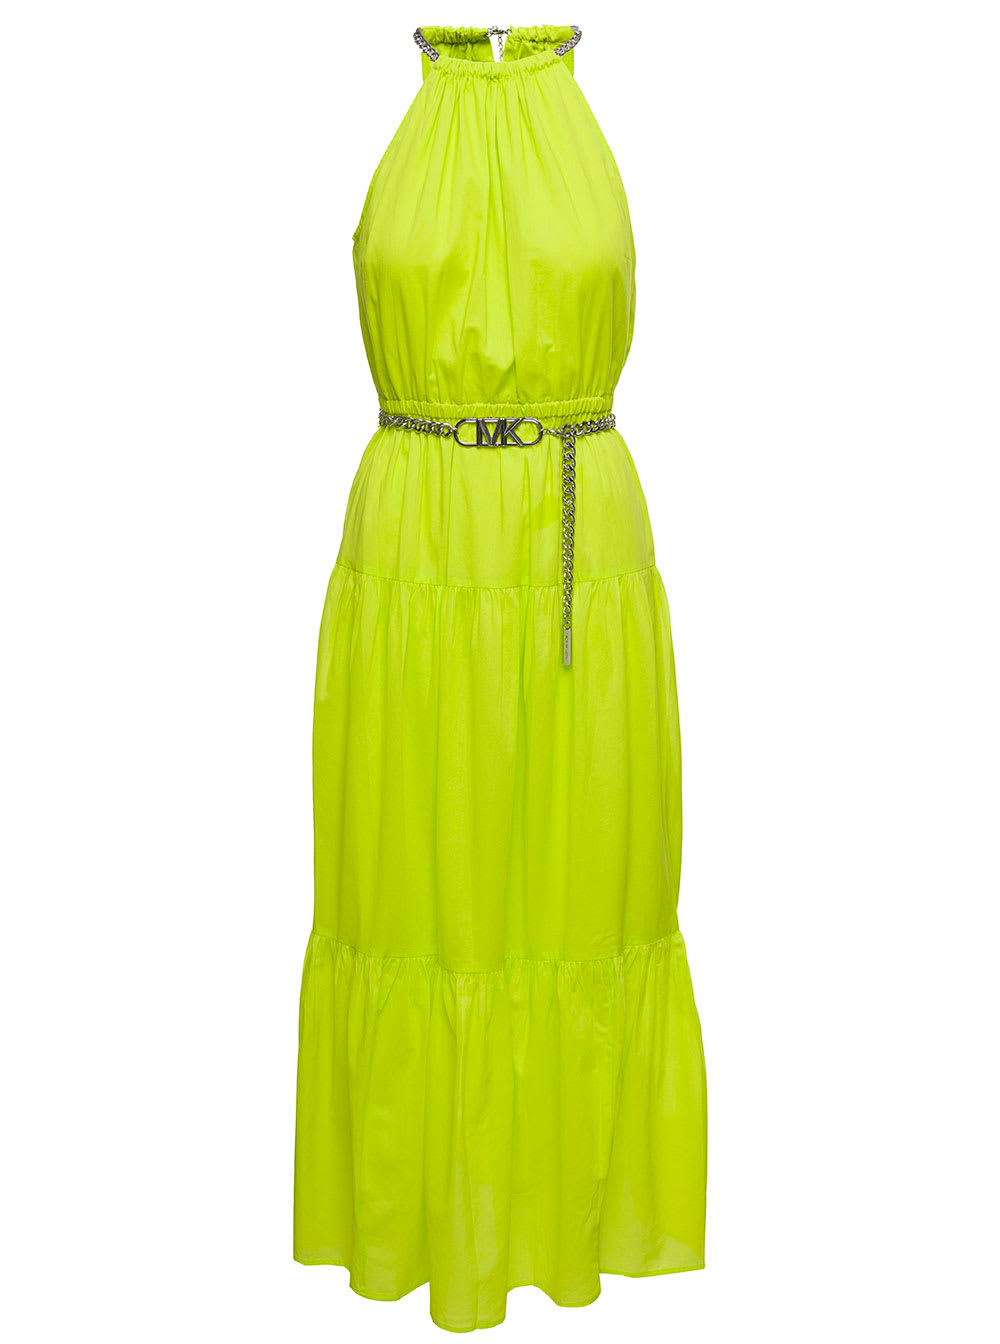 MICHAEL MICHAEL KORS NEON YELLOW HALTER NECK MAXI DRESS WITH CHAIN BELT WITH LOGO IN COTTON WOMAN